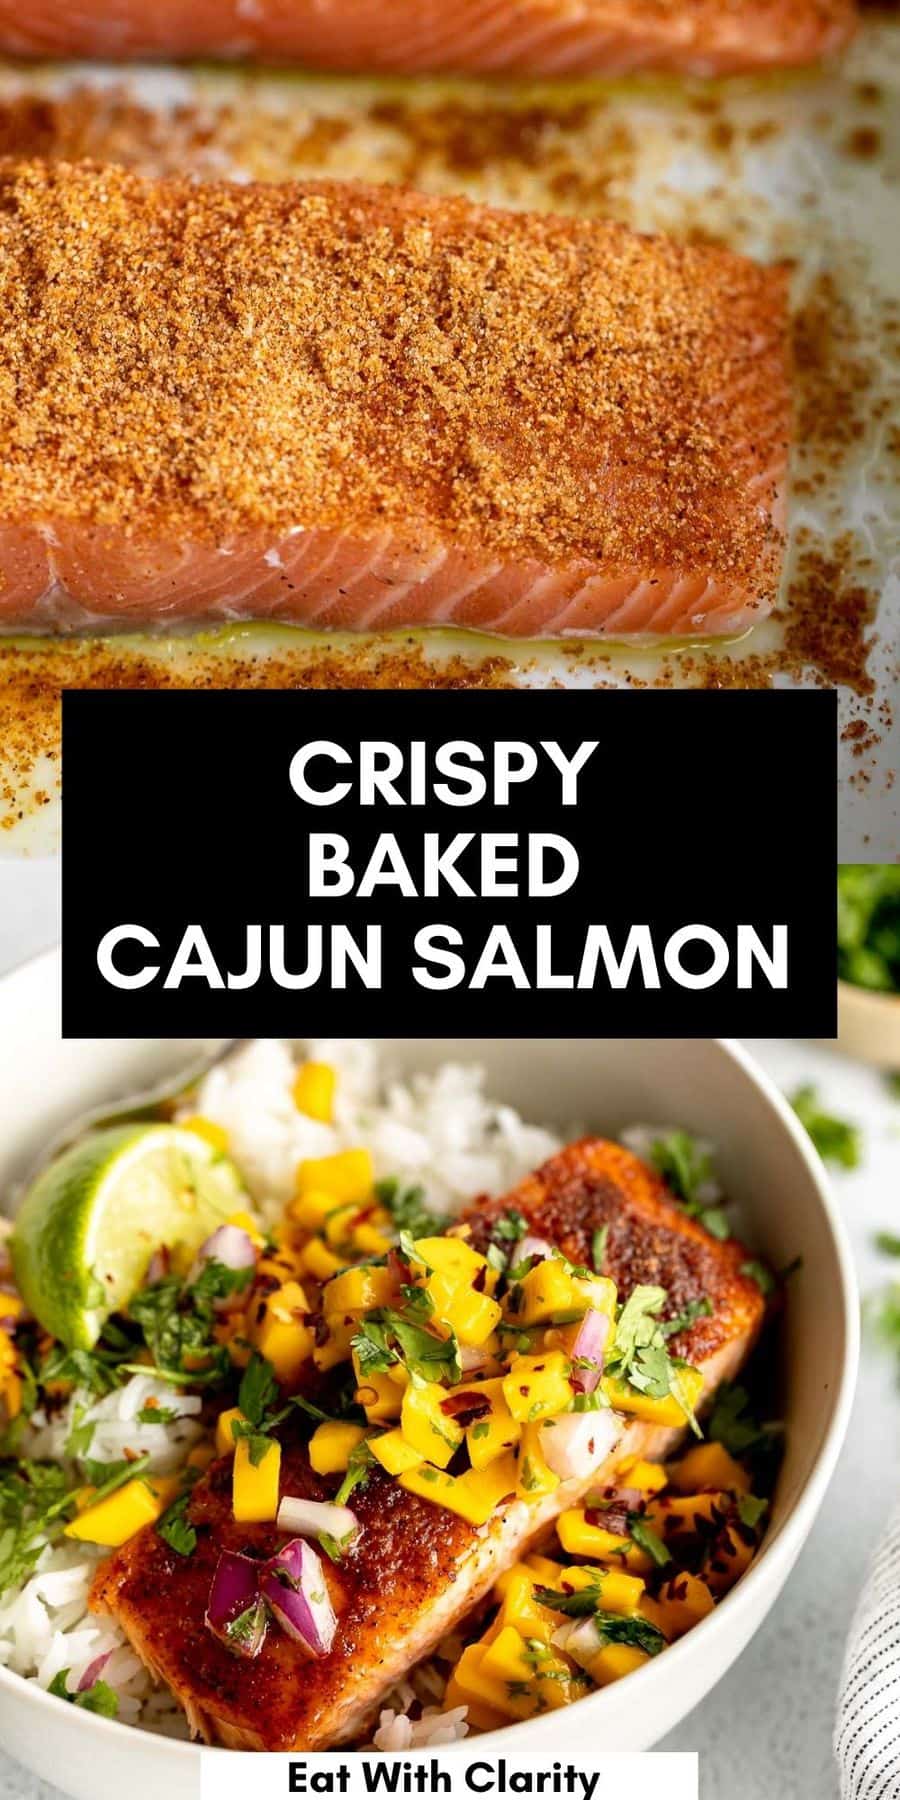 Baked Cajun Salmon - Eat With Clarity